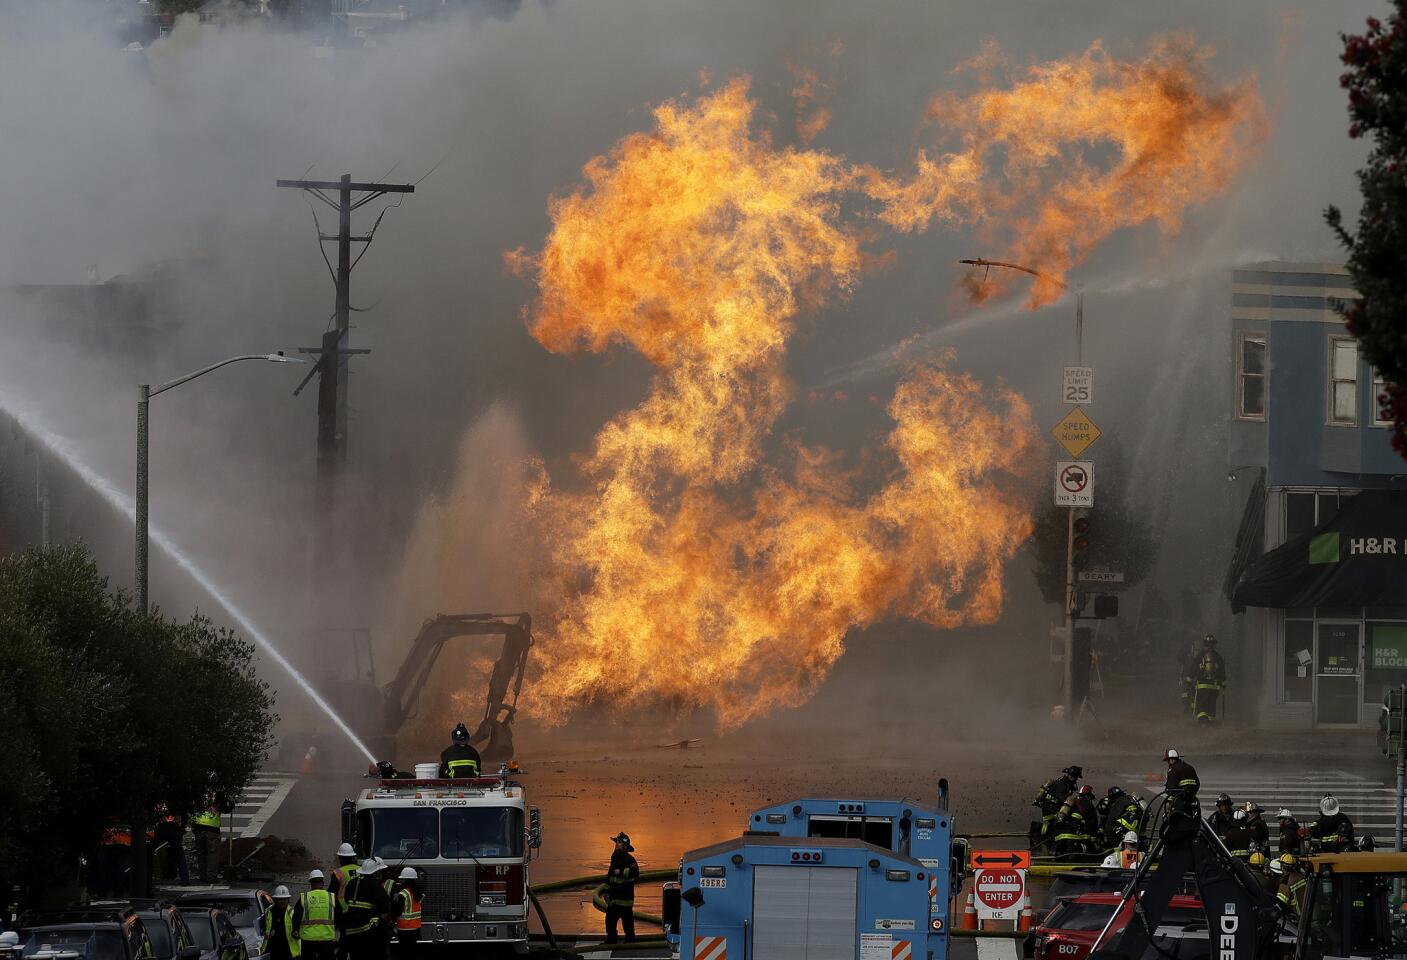 A gas explosion in San Francisco shot flames high into the air Wednesday and was burning four buildings as utility crews scrambled to shut off the flow of gas. Construction workers may have cut a natural gas line, Fire Chief Joanne Hayes-White said.